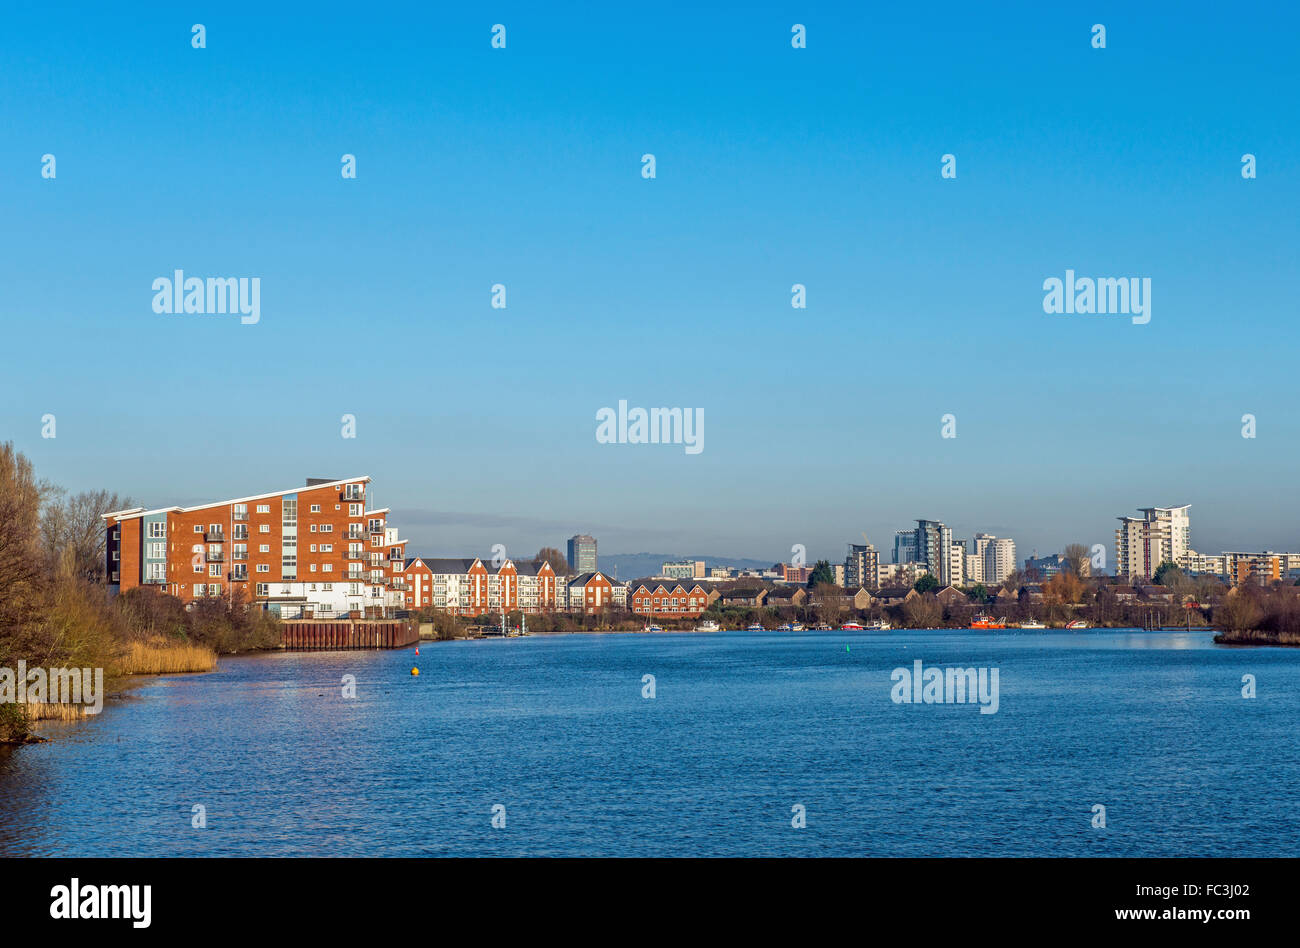 View of the city of Cardiff looking towards the city from the River Taff, south Wales Stock Photo